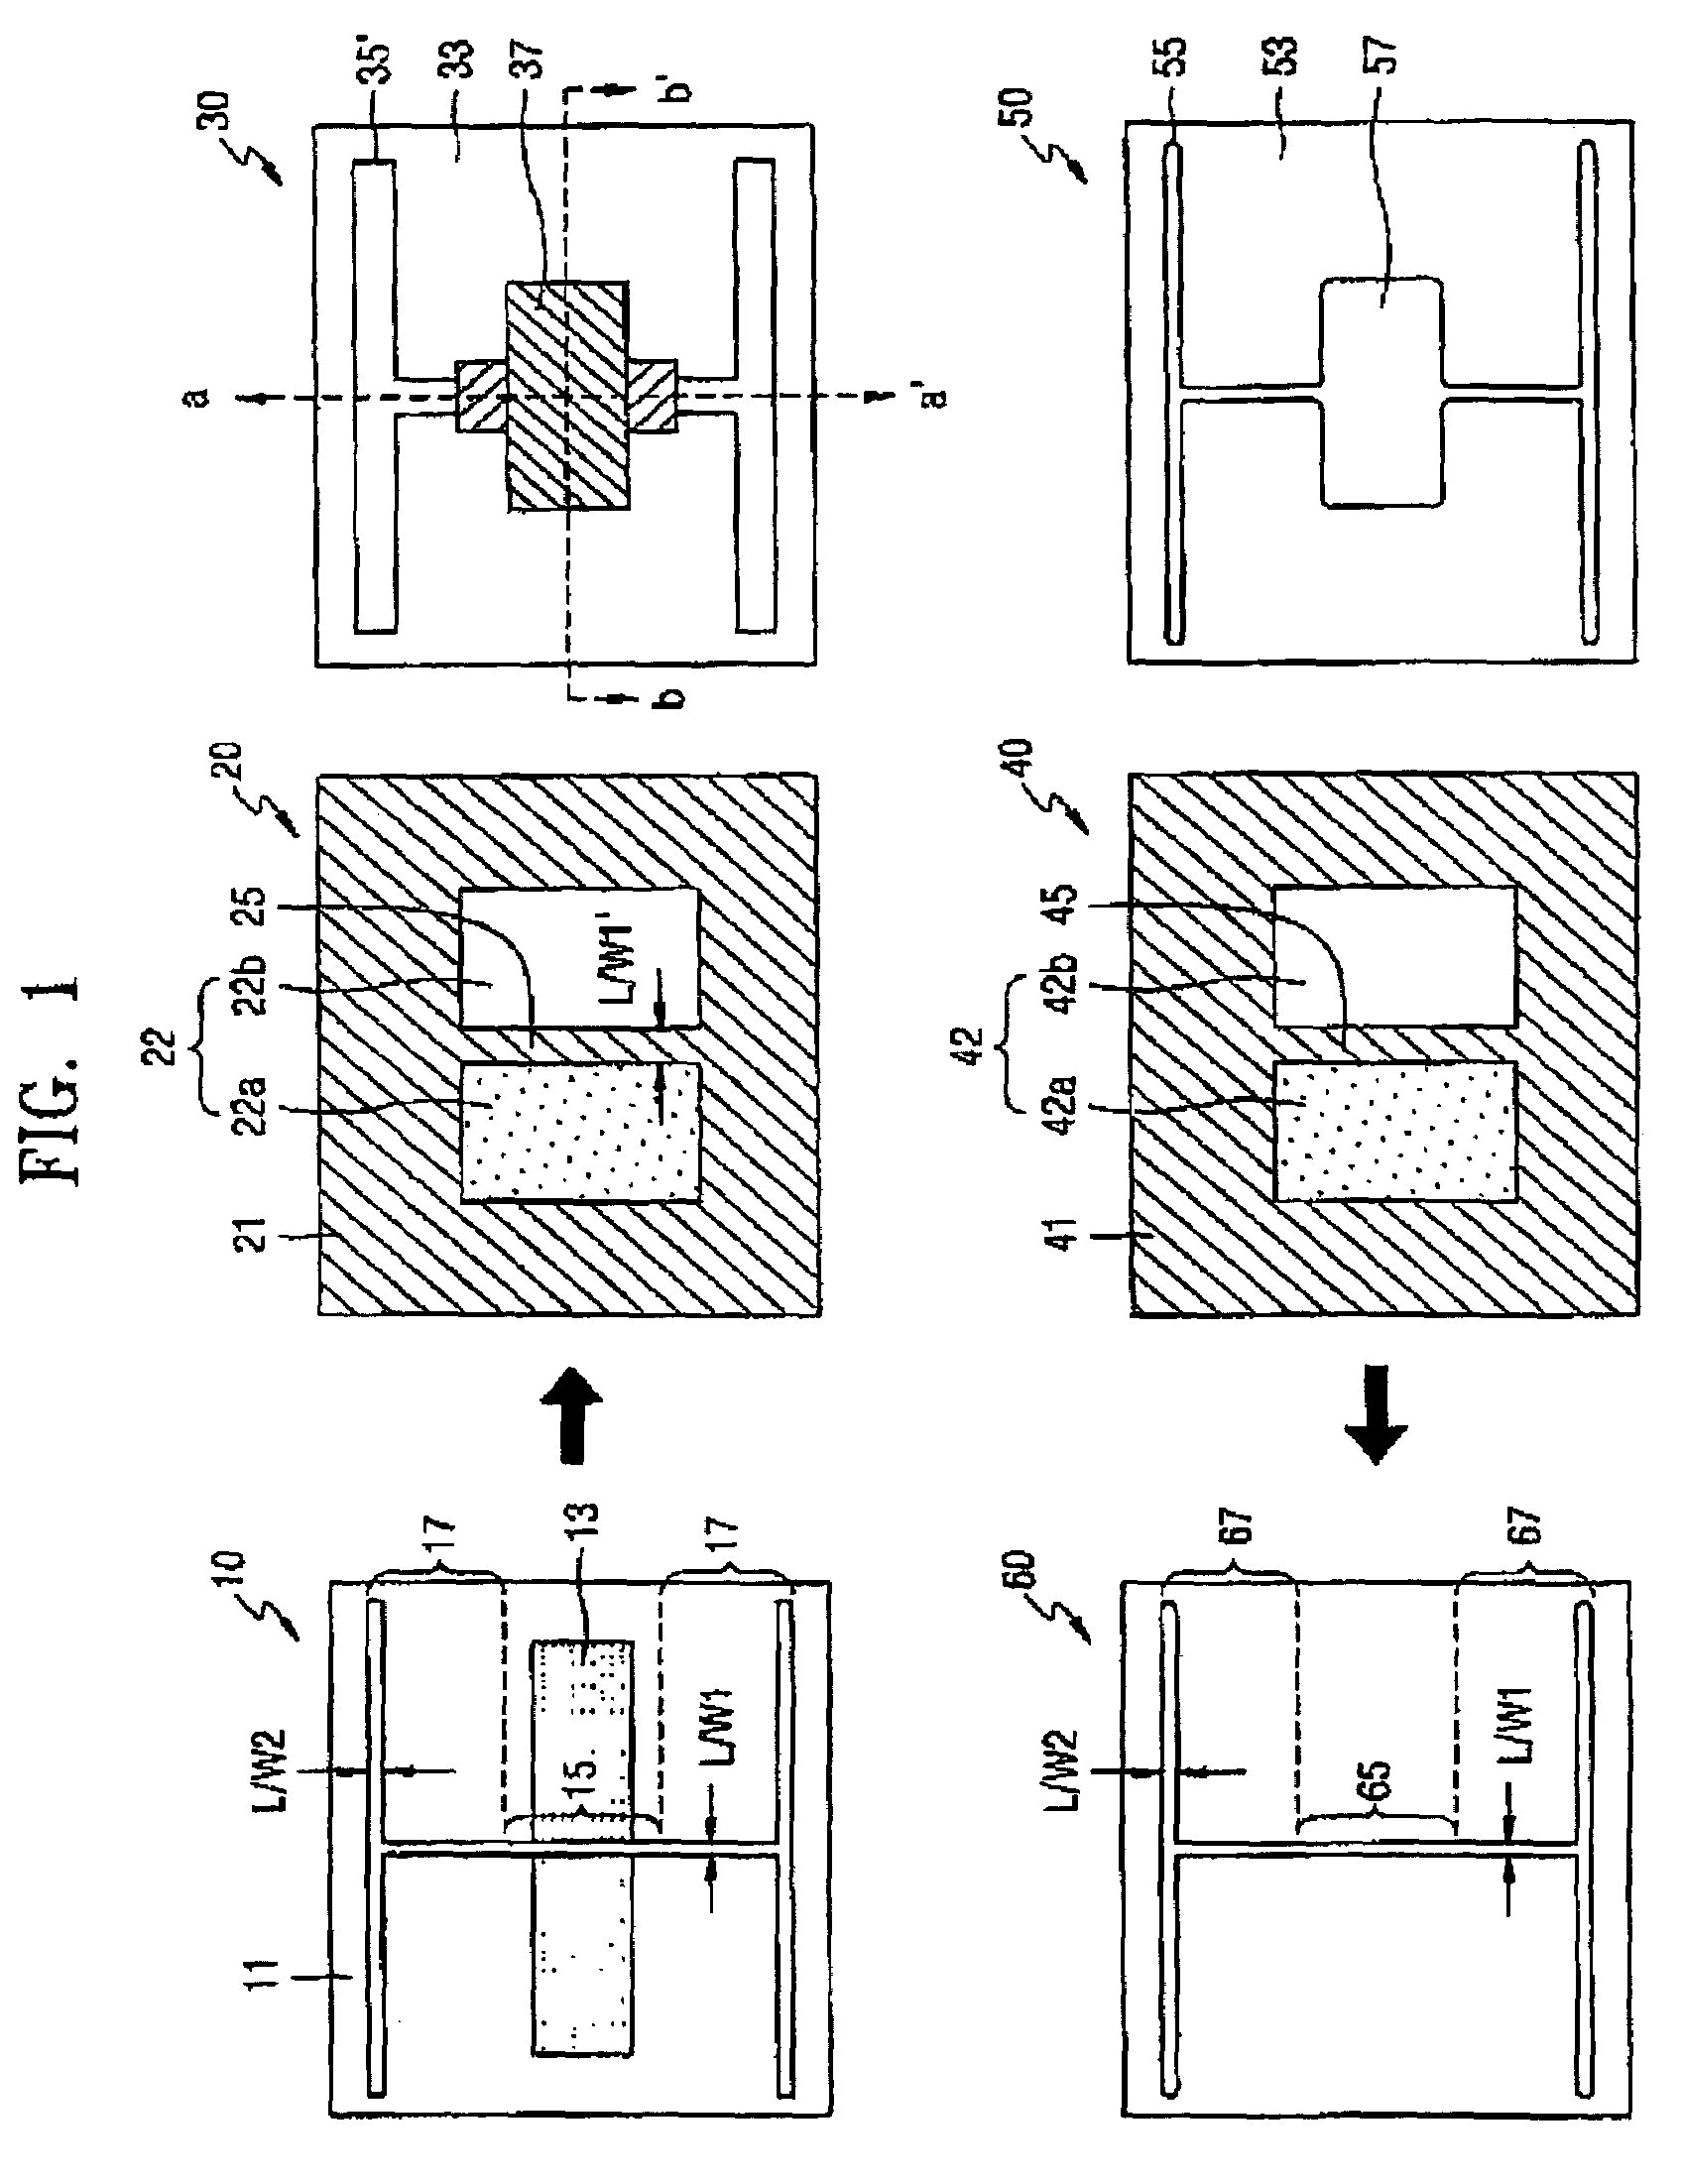 Mask for manufacturing a highly-integrated circuit device